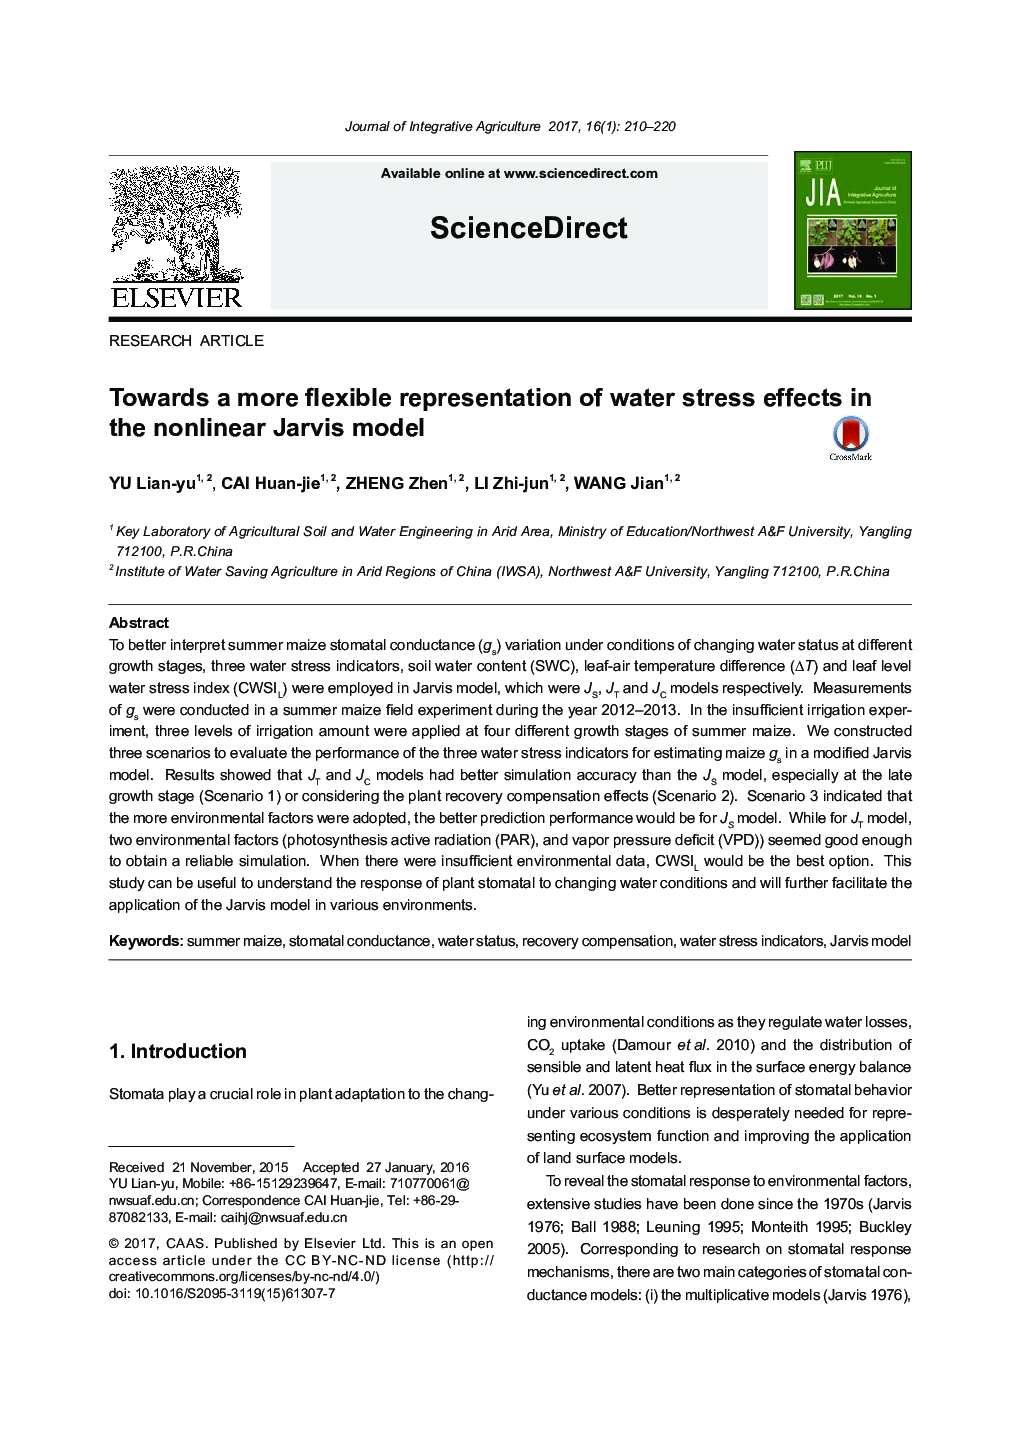 Towards a more flexible representation of water stress effects in the nonlinear Jarvis model